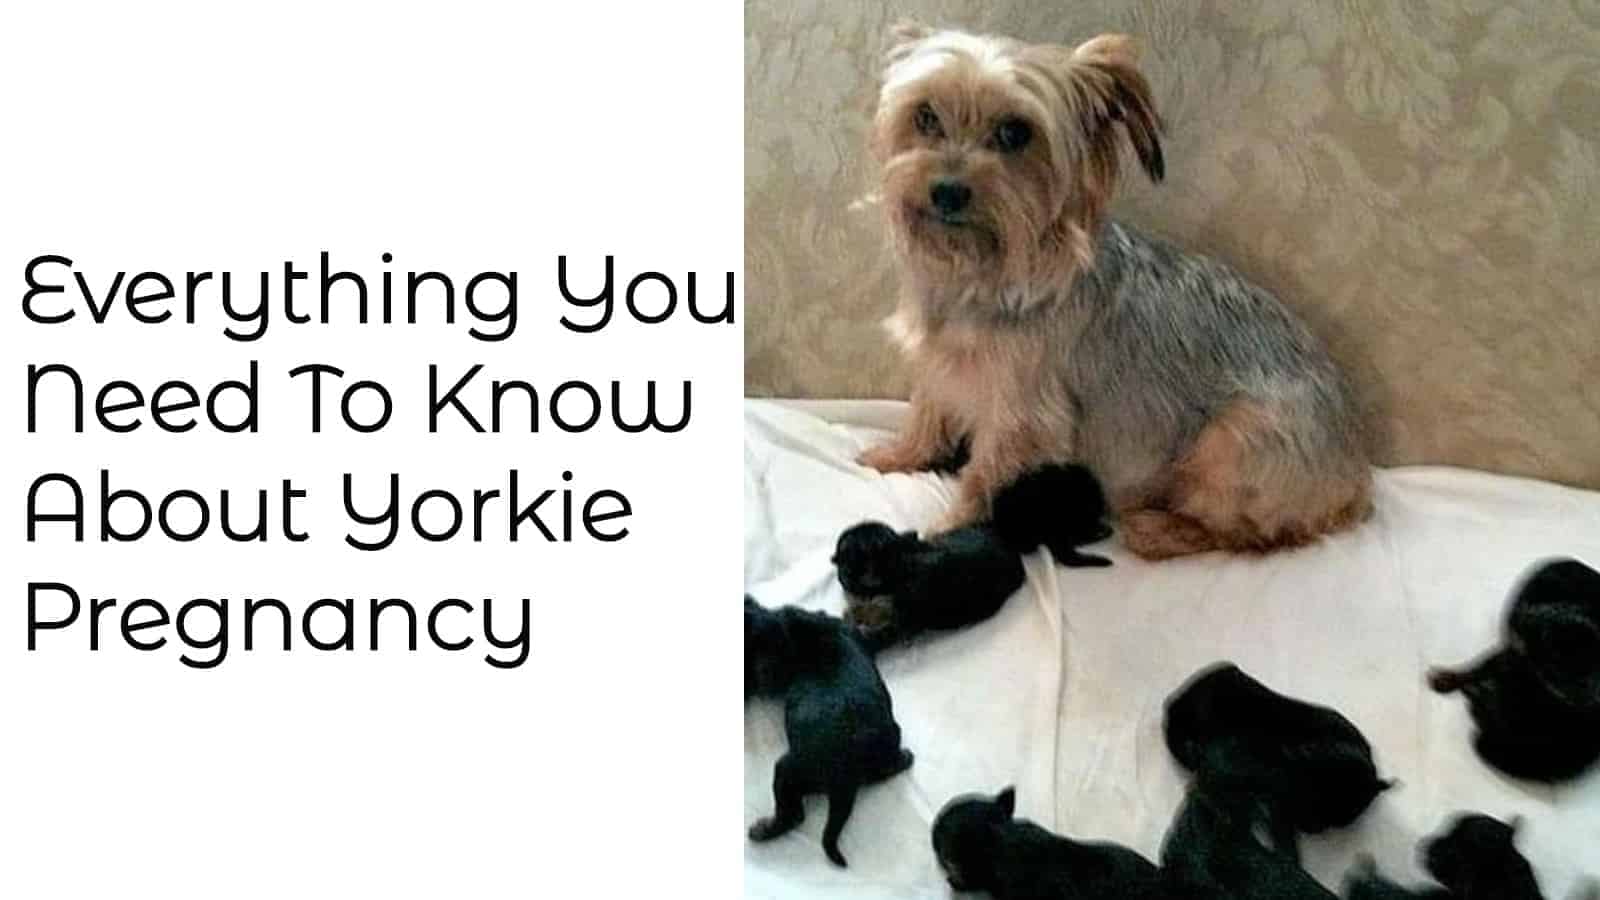 when can a yorkie get pregnant?